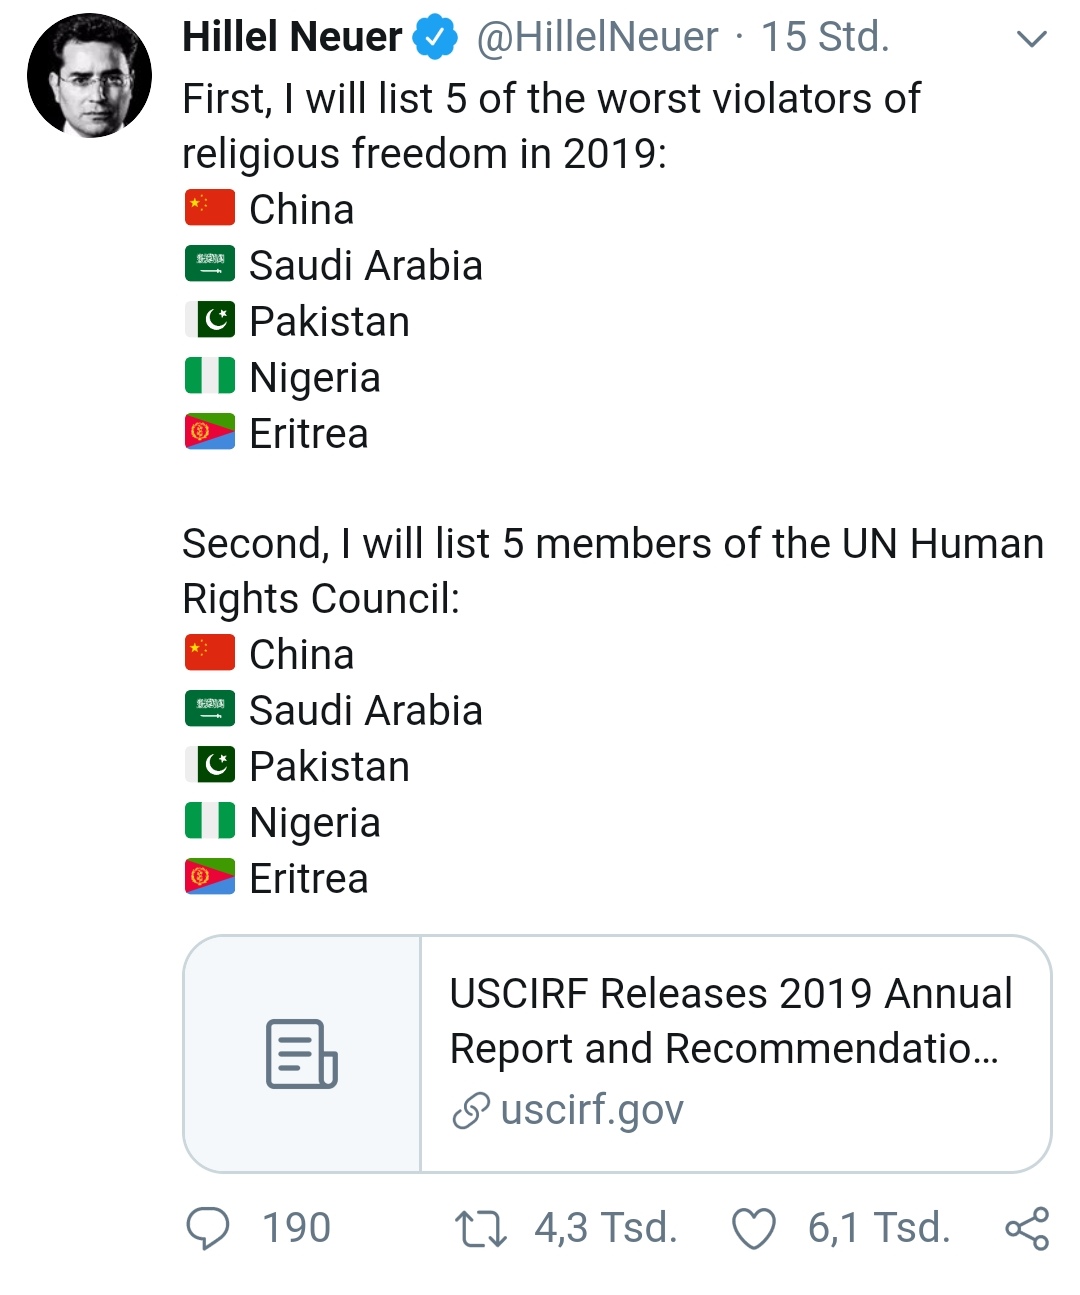 pics and memes - angle - Hillel Neuer 15 Std. First, I will list 5 of the worst violators of religious freedom in 2019 China Saudi Arabia C Pakistan O Nigeria Eritrea Second, I will list 5 members of the Un Human Rights Council China e Saudi Arabia Pakist